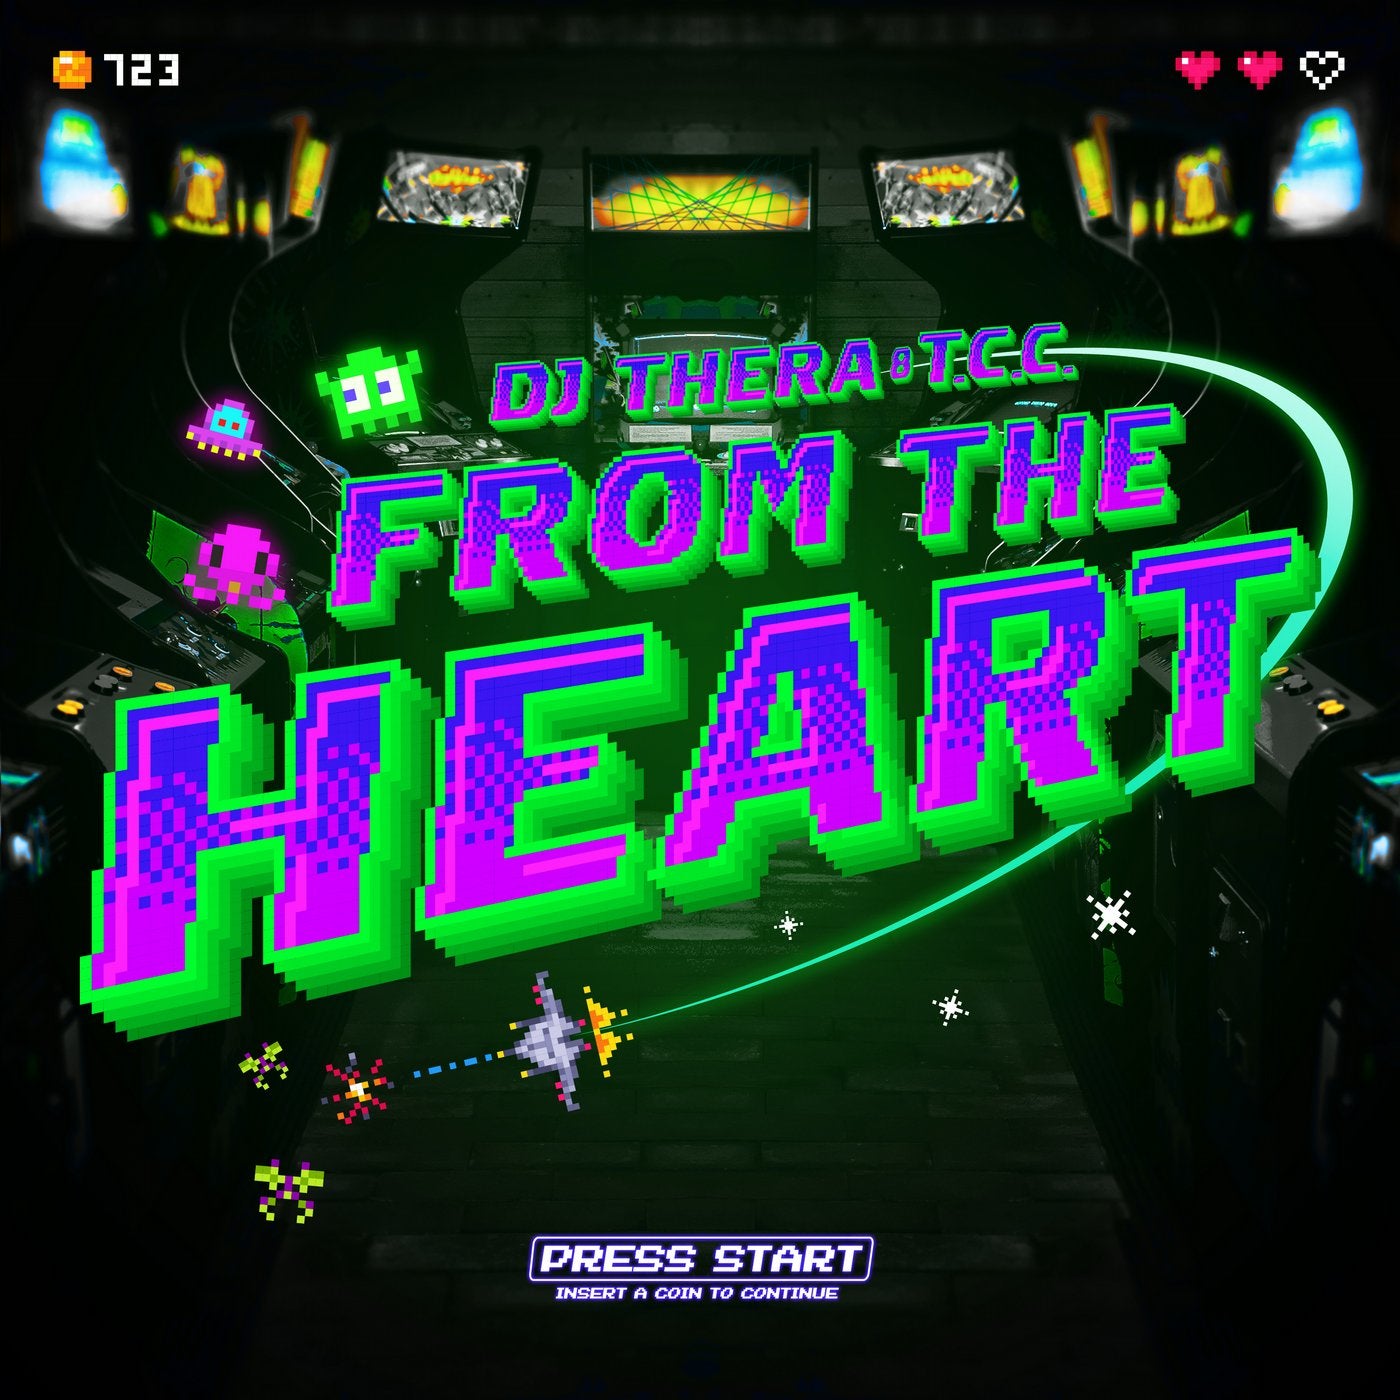 From The Heart - Pro Mixes